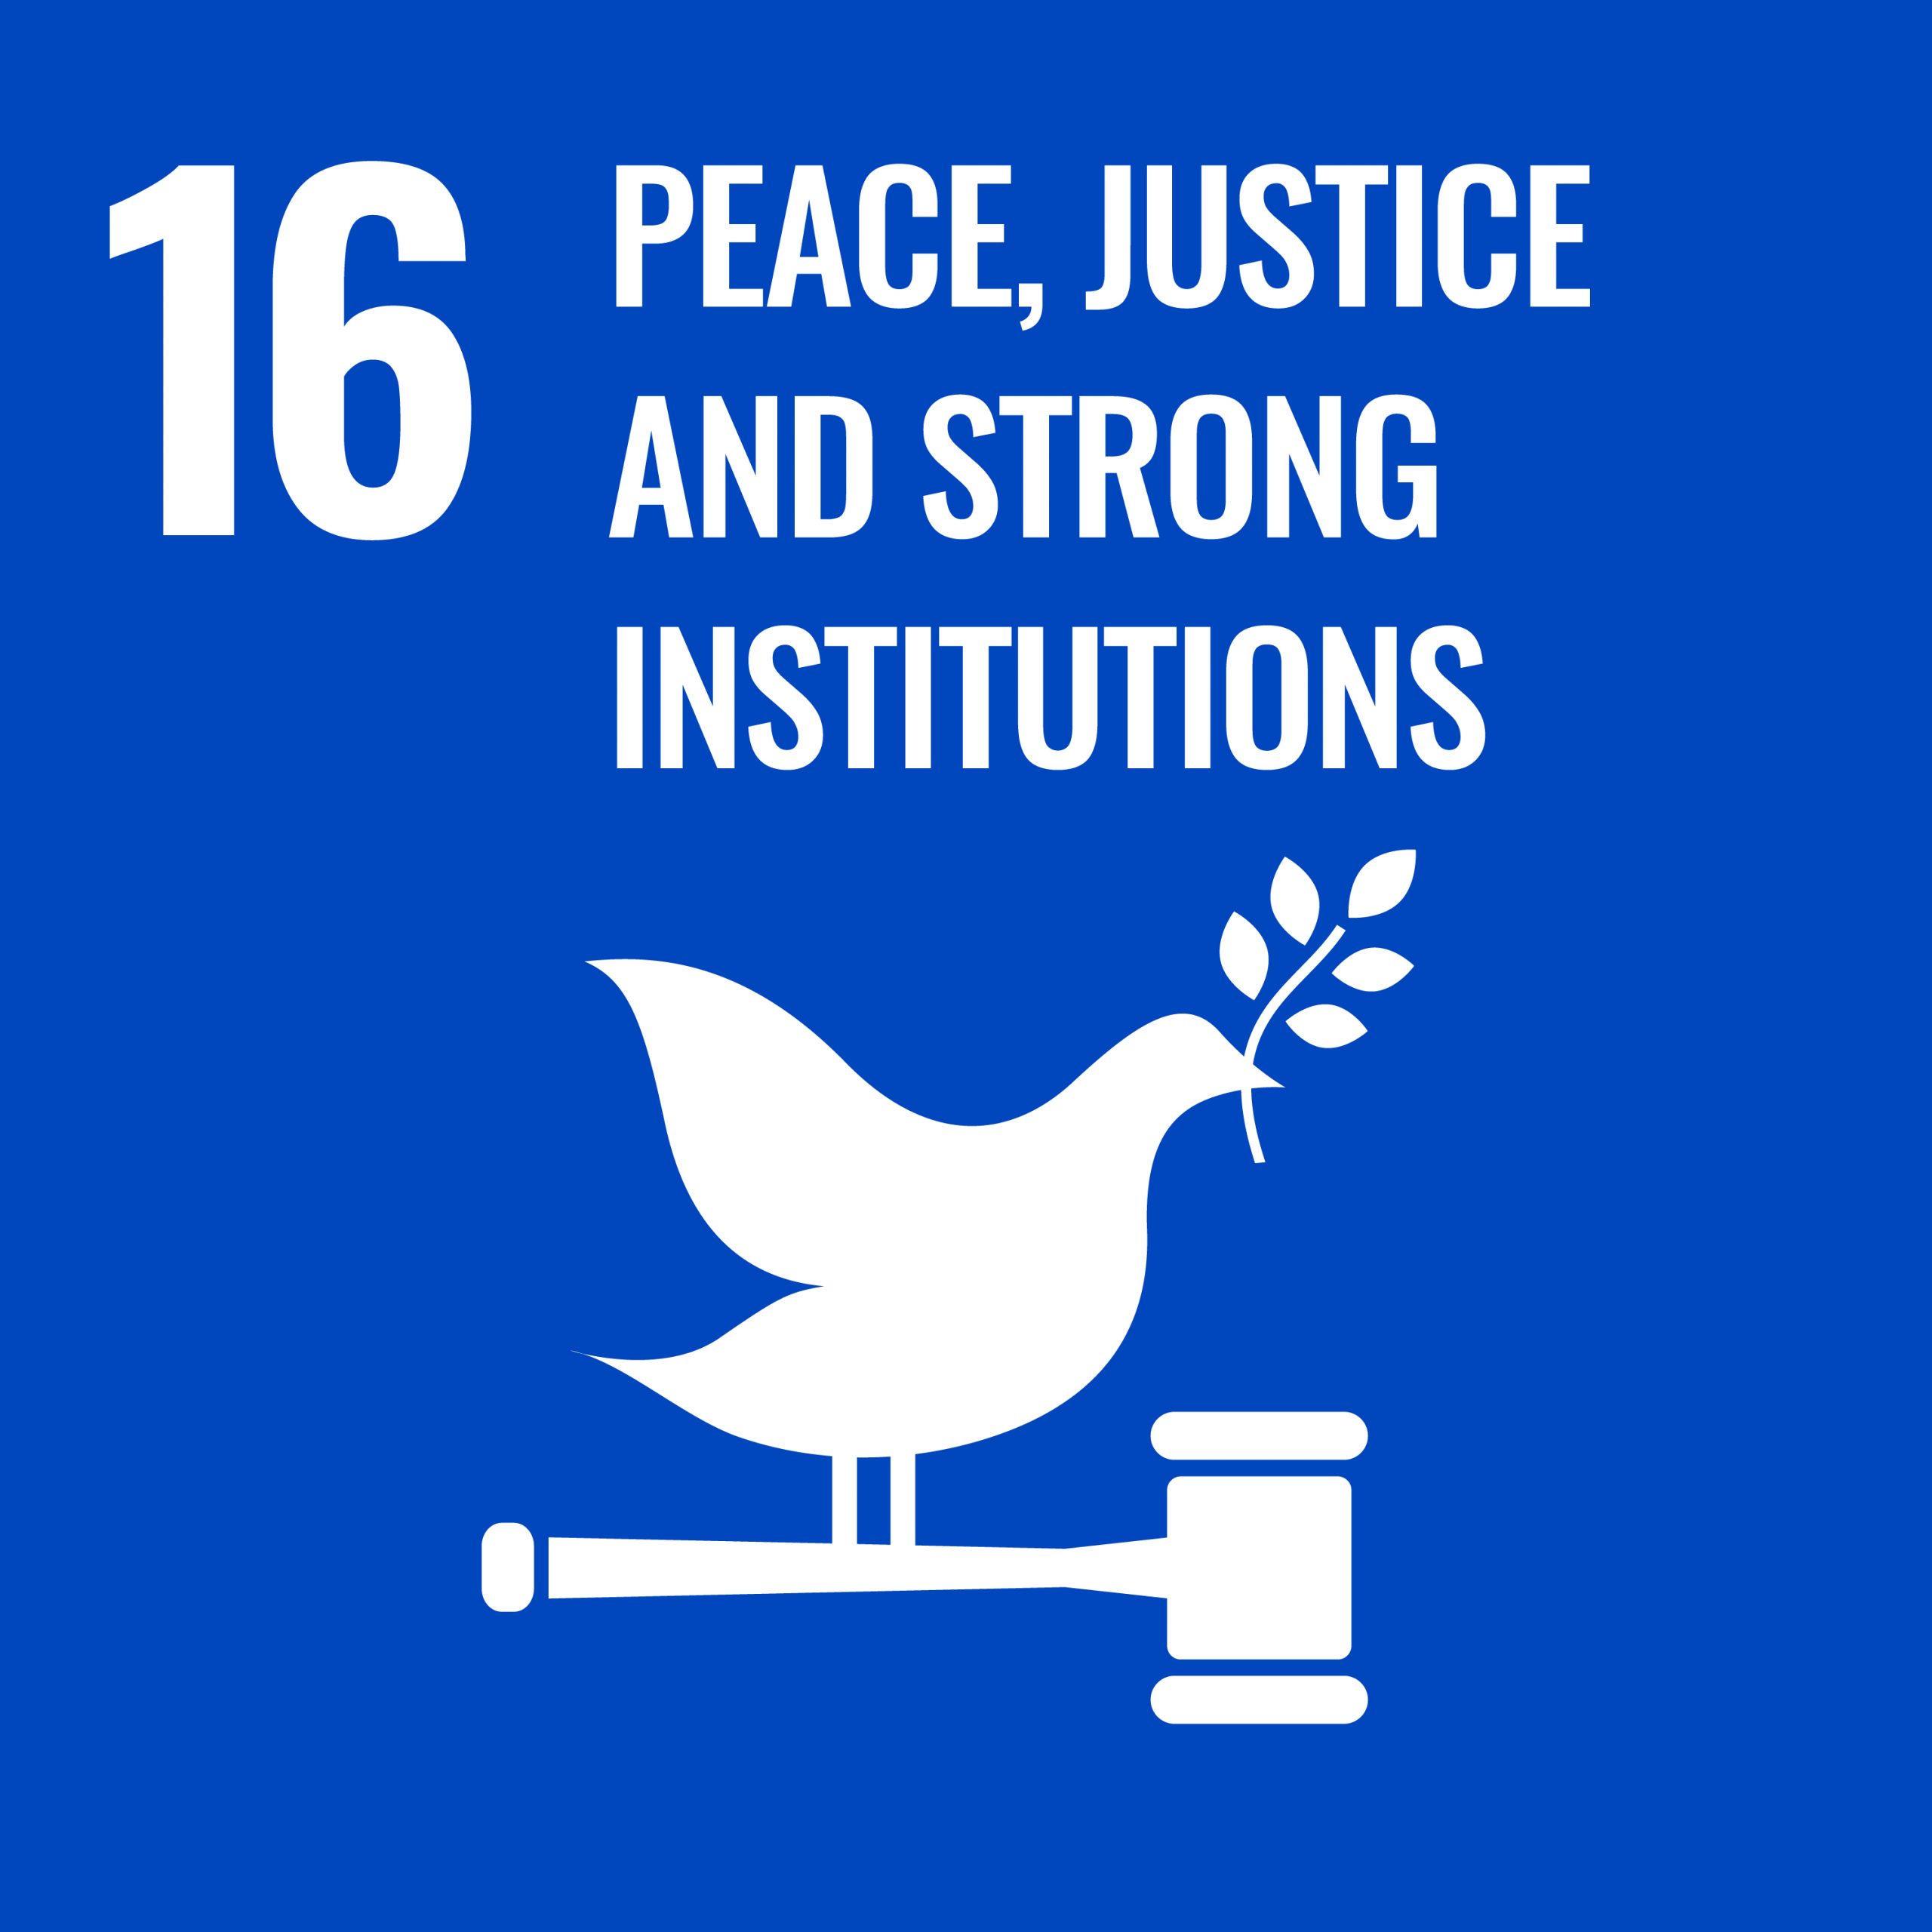 Peace Justice and Strong institutions - SDG 16